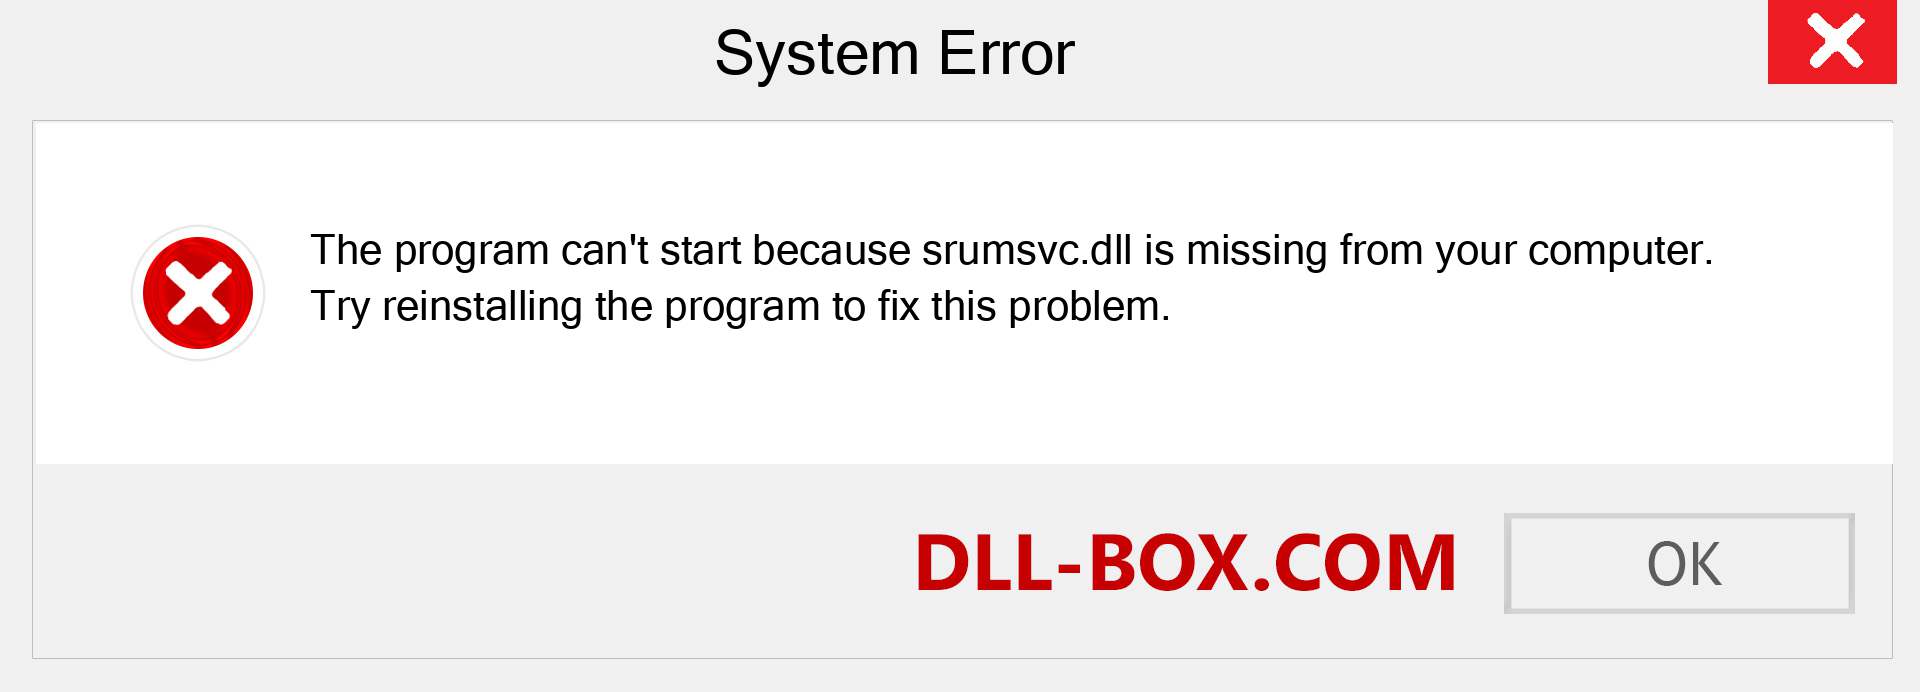  srumsvc.dll file is missing?. Download for Windows 7, 8, 10 - Fix  srumsvc dll Missing Error on Windows, photos, images